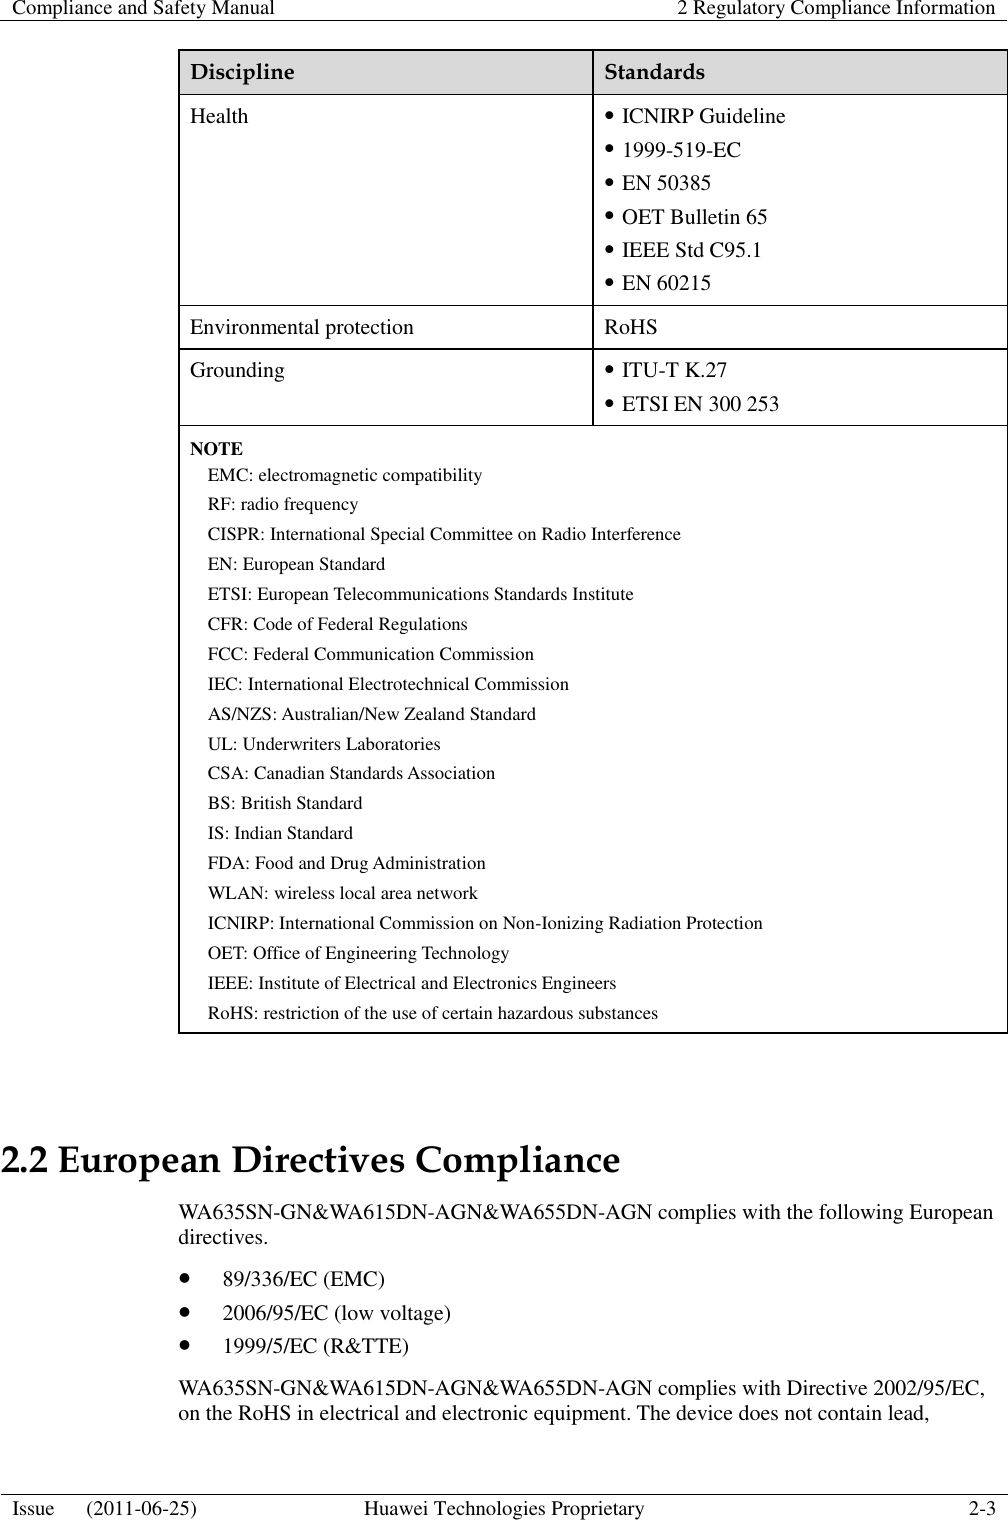 Compliance and Safety Manual 2 Regulatory Compliance Information  Issue      (2011-06-25) Huawei Technologies Proprietary 2-3  Discipline Standards Health  ICNIRP Guideline  1999-519-EC  EN 50385  OET Bulletin 65  IEEE Std C95.1  EN 60215 Environmental protection RoHS Grounding  ITU-T K.27  ETSI EN 300 253 NOTE EMC: electromagnetic compatibility RF: radio frequency CISPR: International Special Committee on Radio Interference EN: European Standard ETSI: European Telecommunications Standards Institute CFR: Code of Federal Regulations FCC: Federal Communication Commission IEC: International Electrotechnical Commission AS/NZS: Australian/New Zealand Standard UL: Underwriters Laboratories CSA: Canadian Standards Association BS: British Standard IS: Indian Standard FDA: Food and Drug Administration WLAN: wireless local area network ICNIRP: International Commission on Non-Ionizing Radiation Protection OET: Office of Engineering Technology IEEE: Institute of Electrical and Electronics Engineers RoHS: restriction of the use of certain hazardous substances  2.2 European Directives Compliance WA635SN-GN&amp;WA615DN-AGN&amp;WA655DN-AGN complies with the following European directives.  89/336/EC (EMC)  2006/95/EC (low voltage)  1999/5/EC (R&amp;TTE) WA635SN-GN&amp;WA615DN-AGN&amp;WA655DN-AGN complies with Directive 2002/95/EC, on the RoHS in electrical and electronic equipment. The device does not contain lead, 